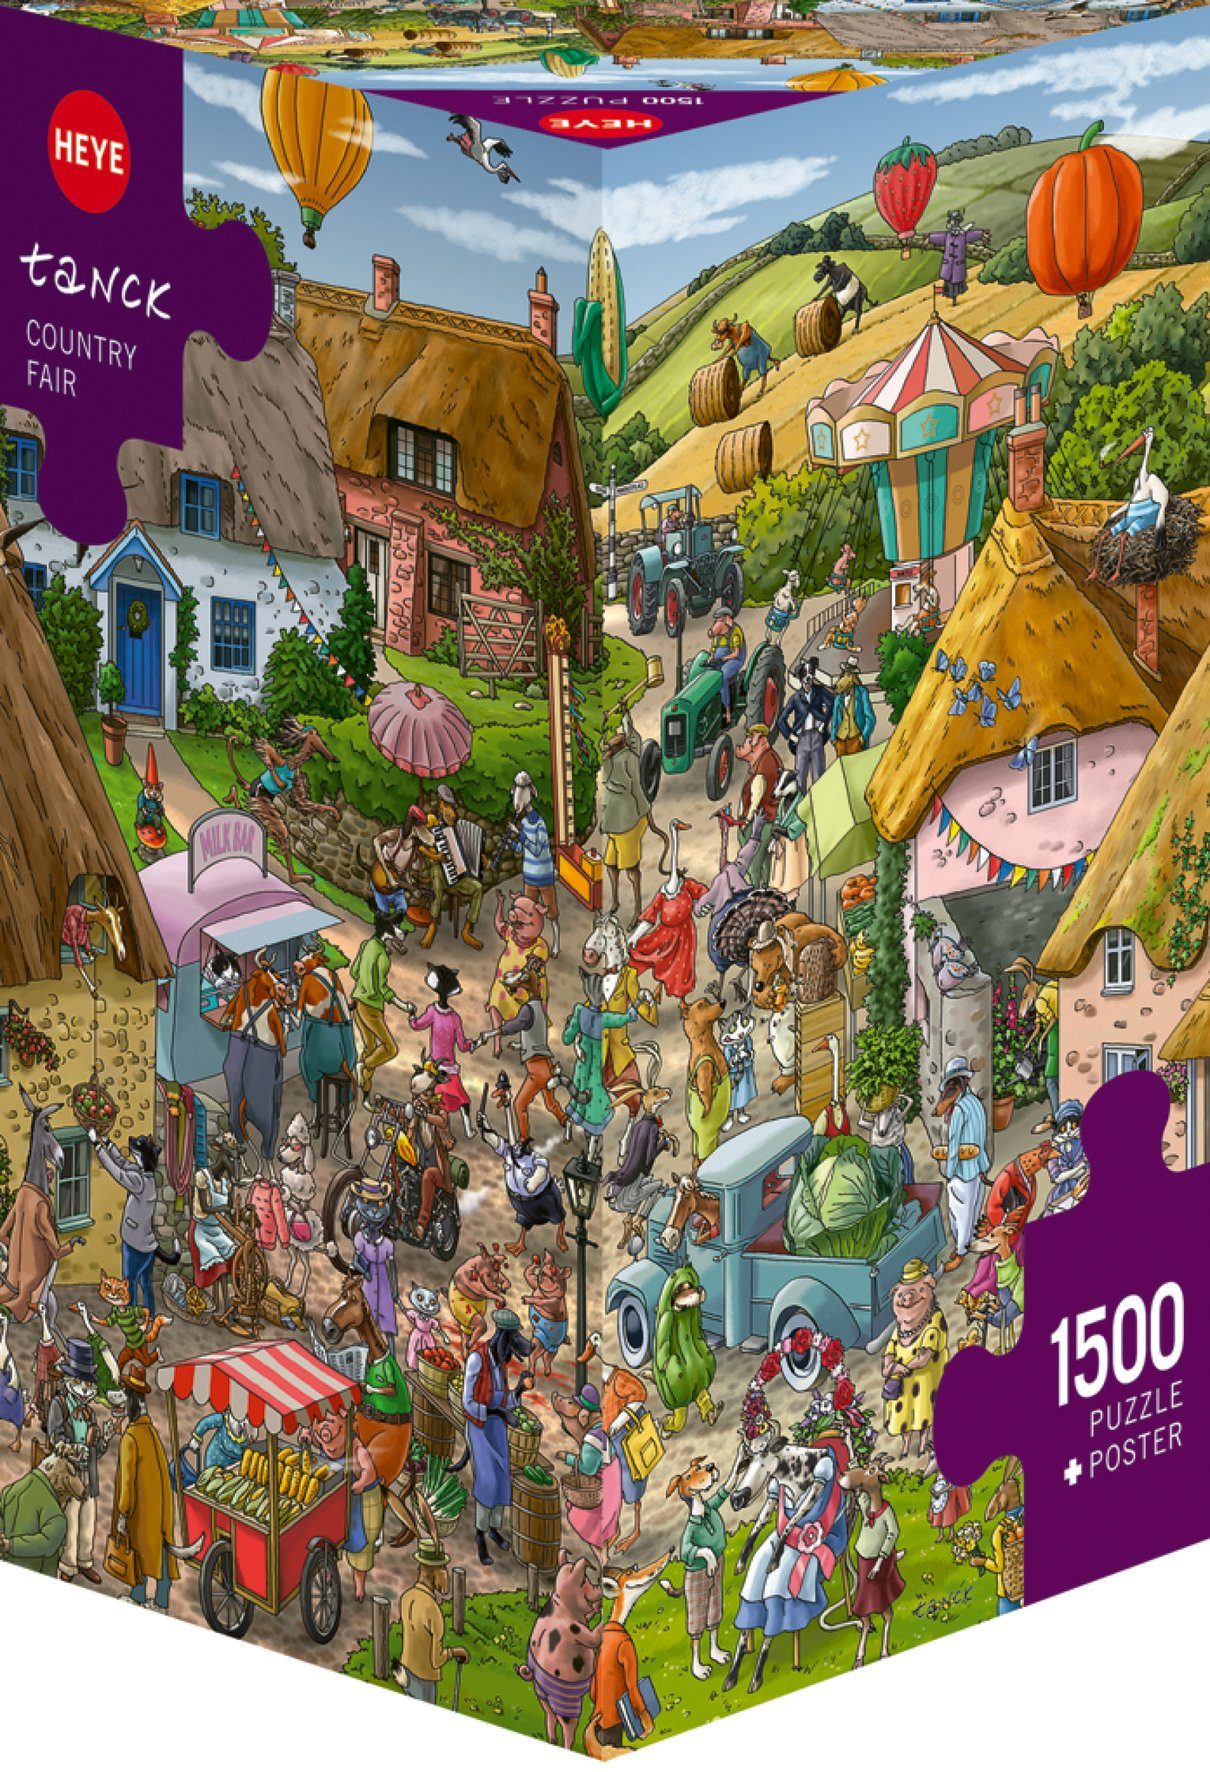 1500 HEYE in Puzzleteile, Made Fair, Puzzle Europe Tanck, Country